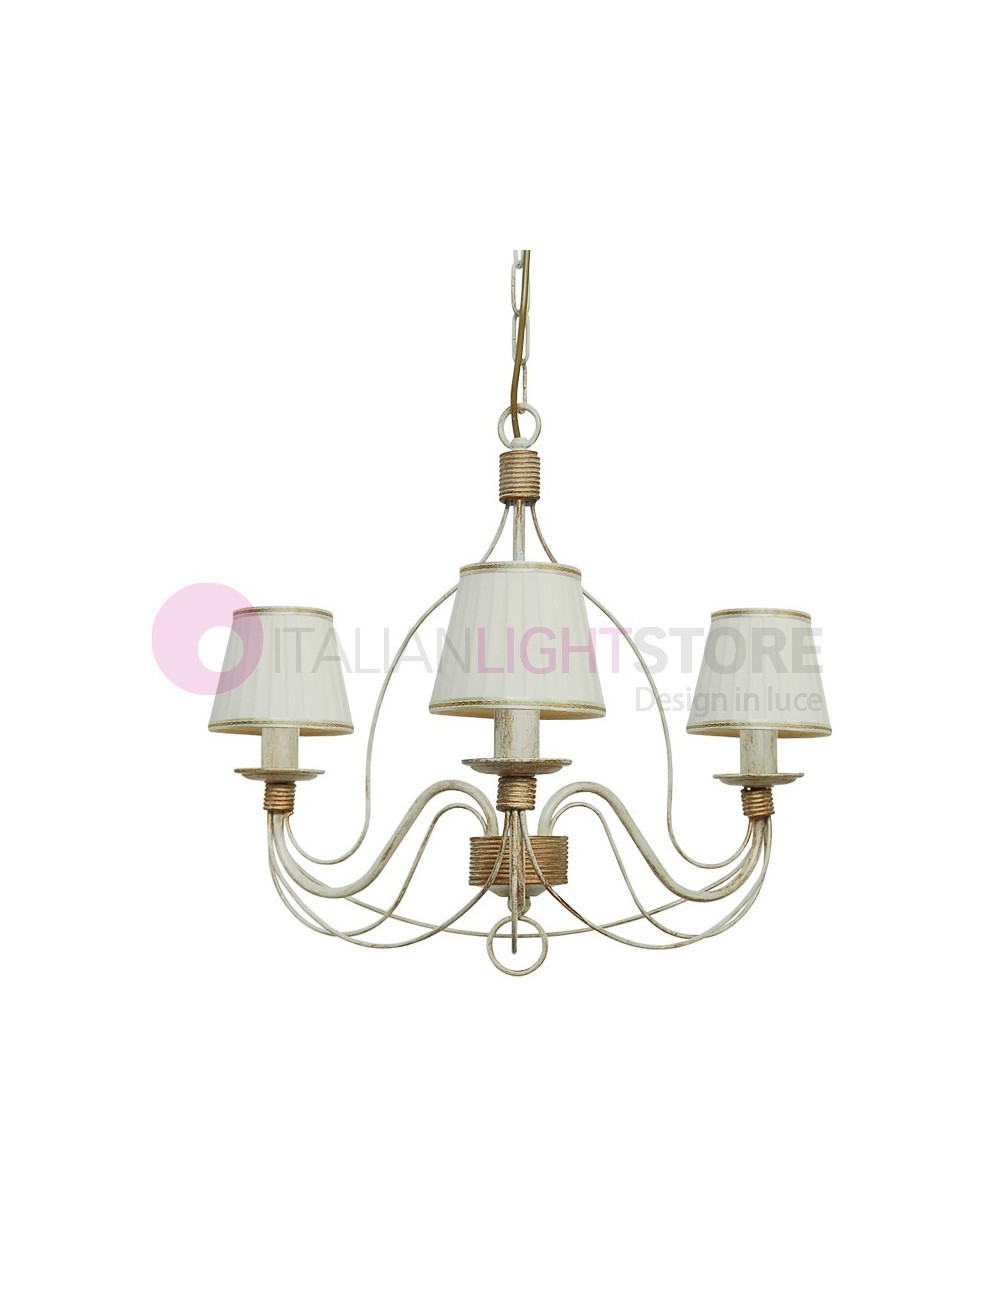 Flemish Rustic colored iron chandelier with lampshade lighting rustic country style